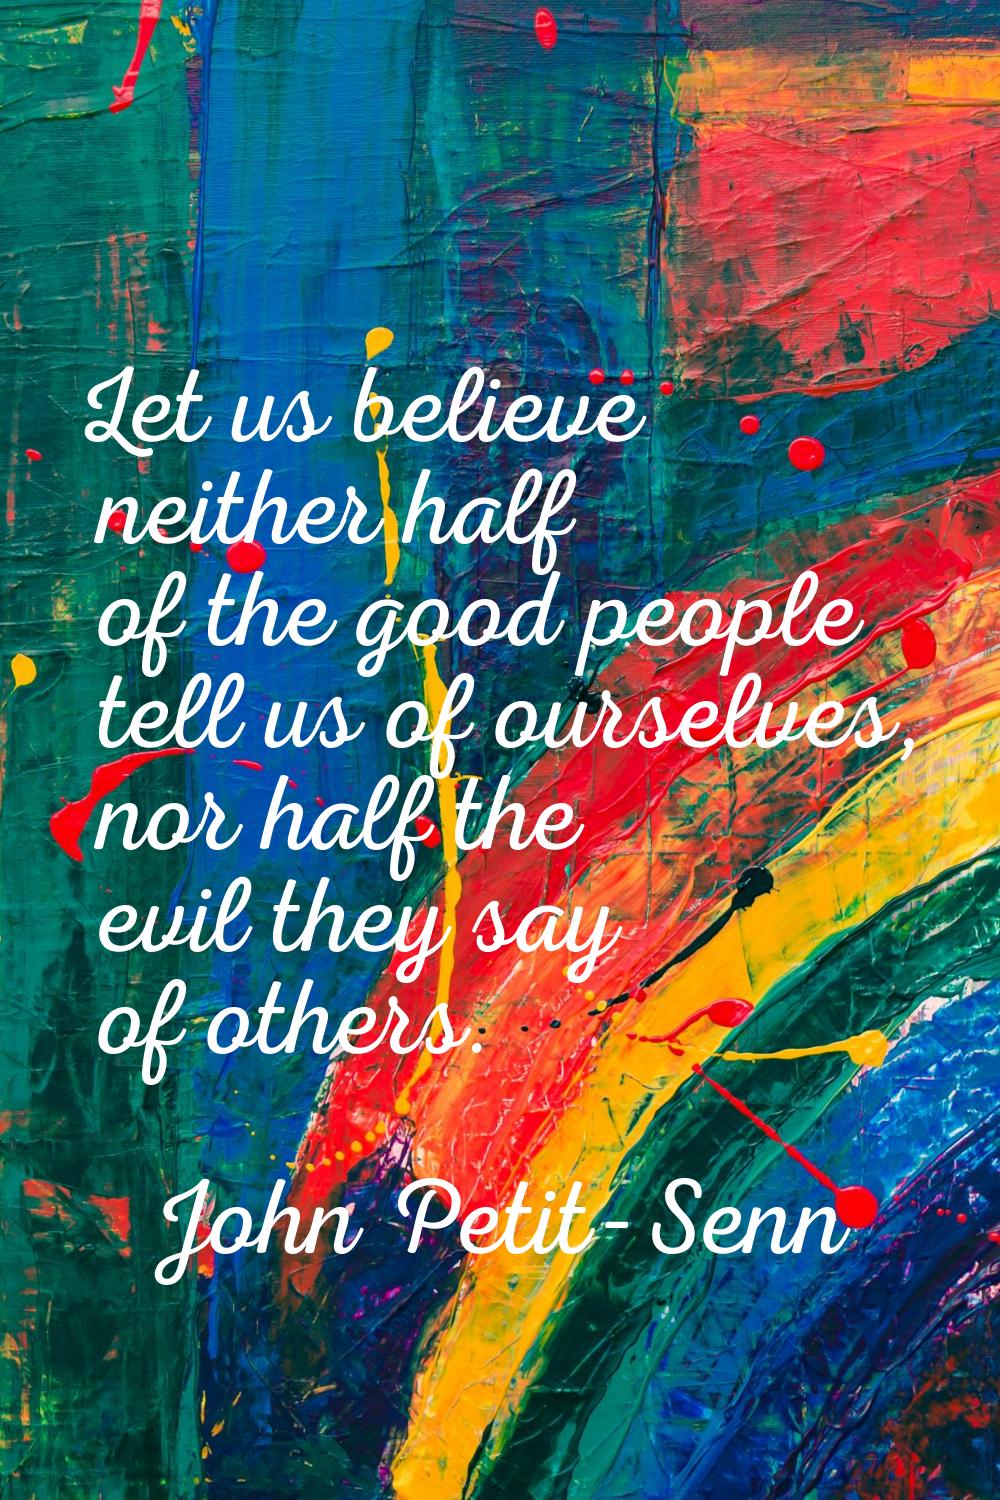 Let us believe neither half of the good people tell us of ourselves, nor half the evil they say of 